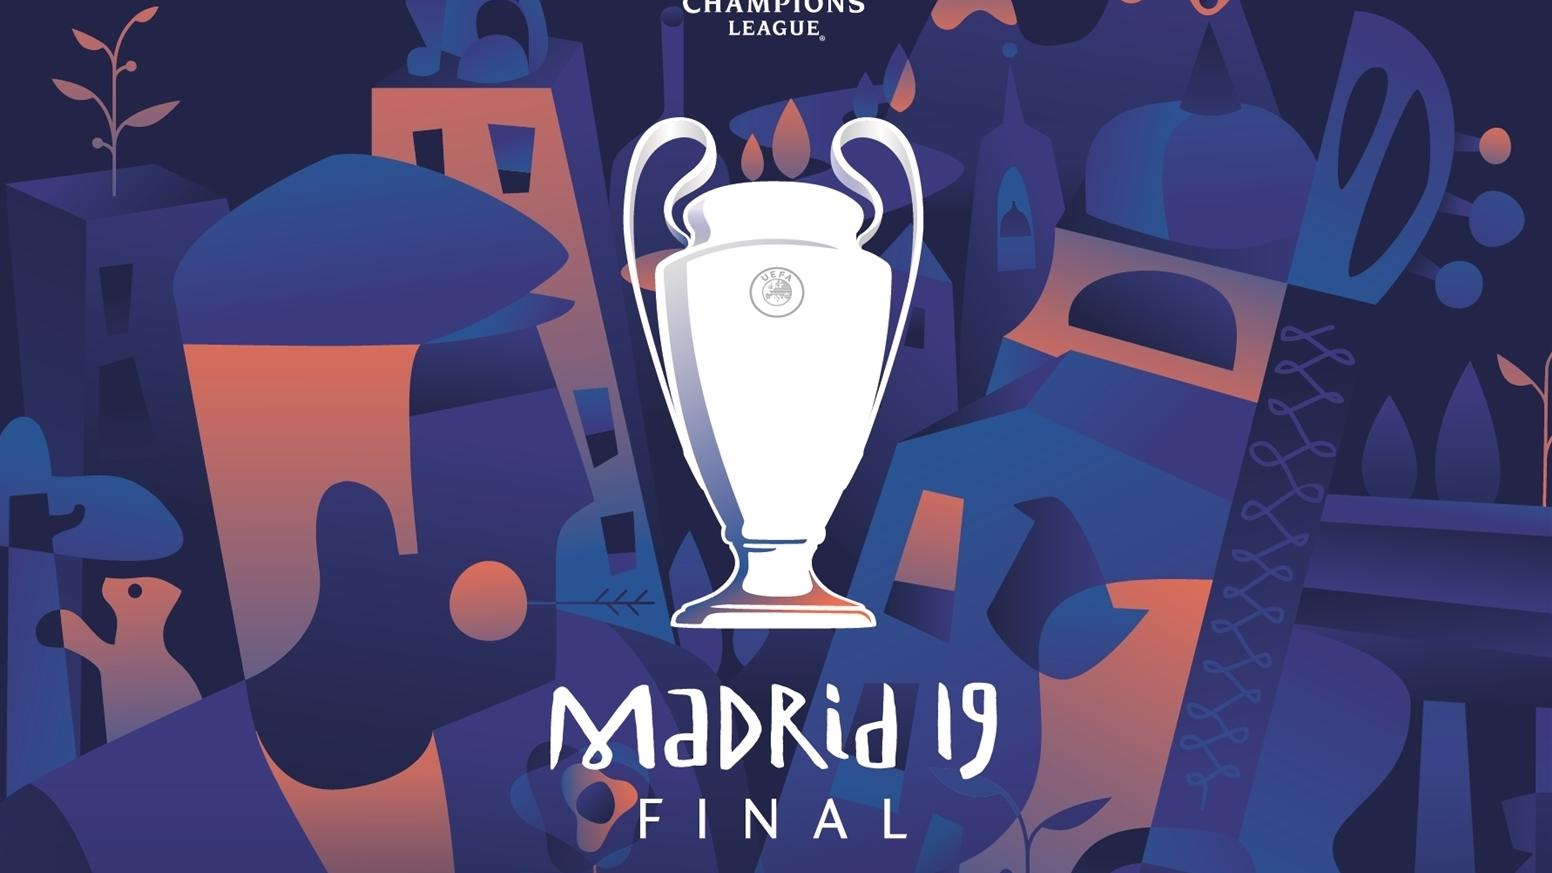 tickets for the champions league final 2019